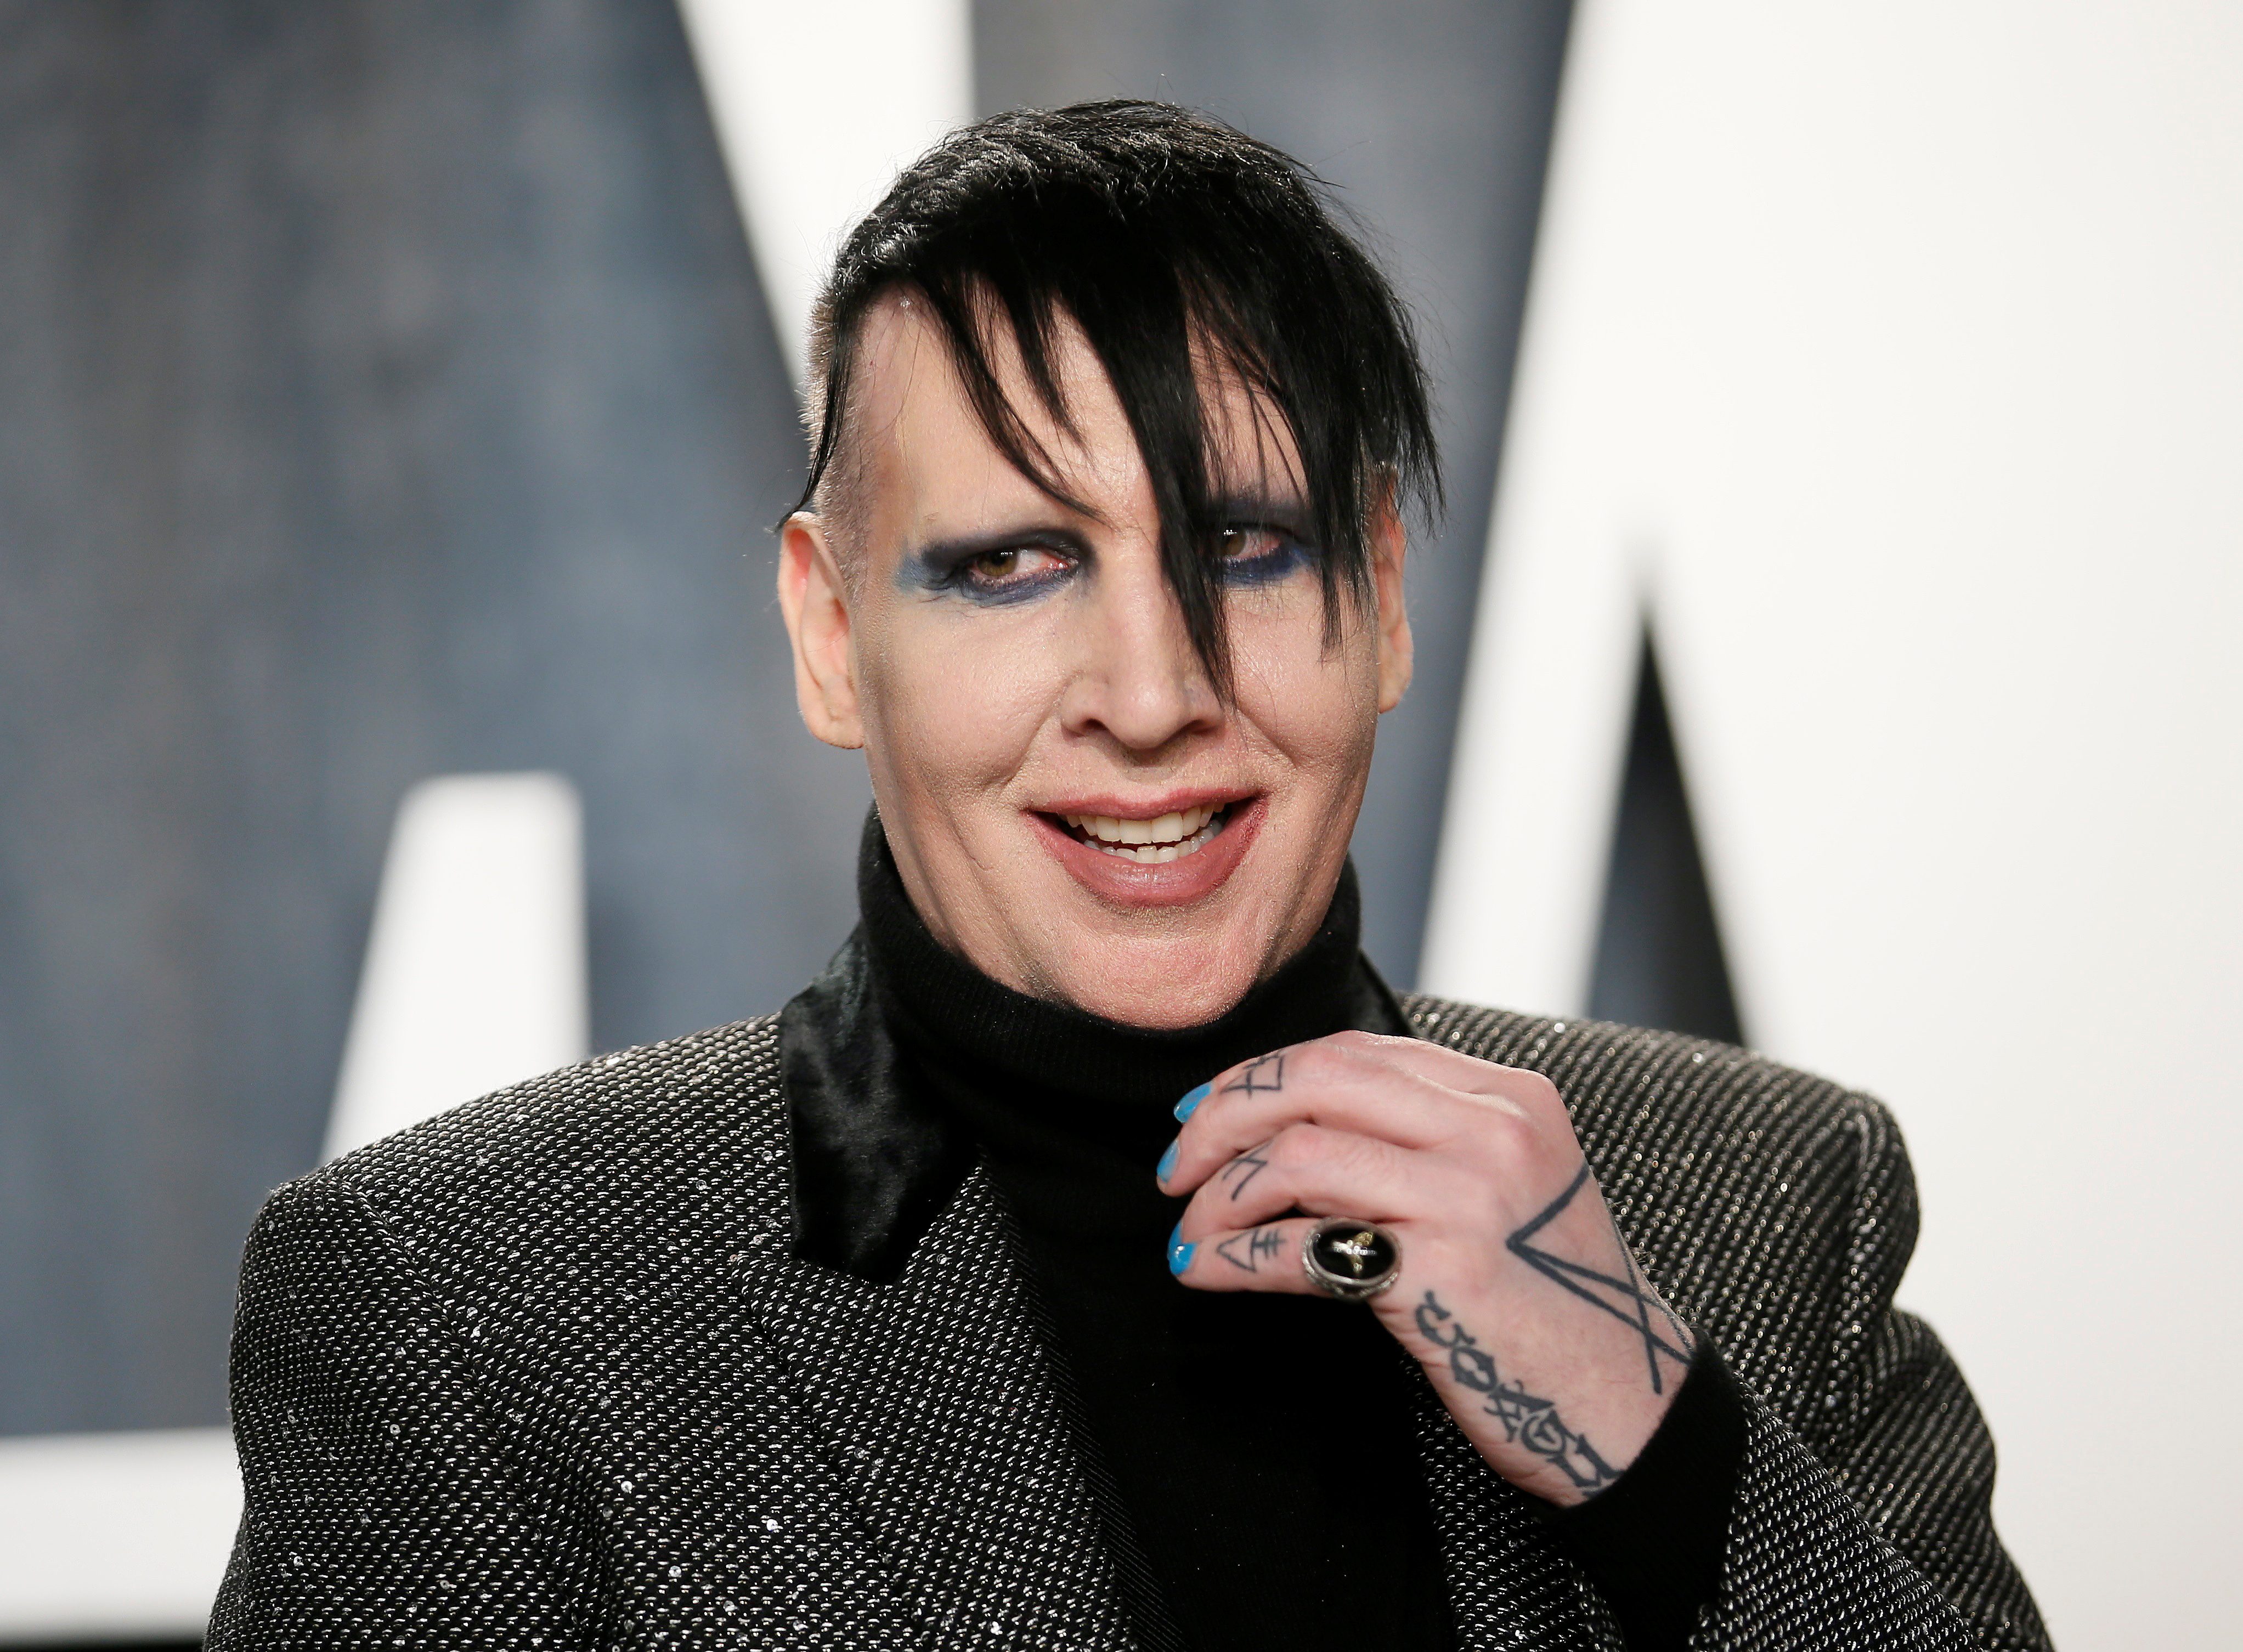 Marilyn Manson dropped by record label after abuse allegations